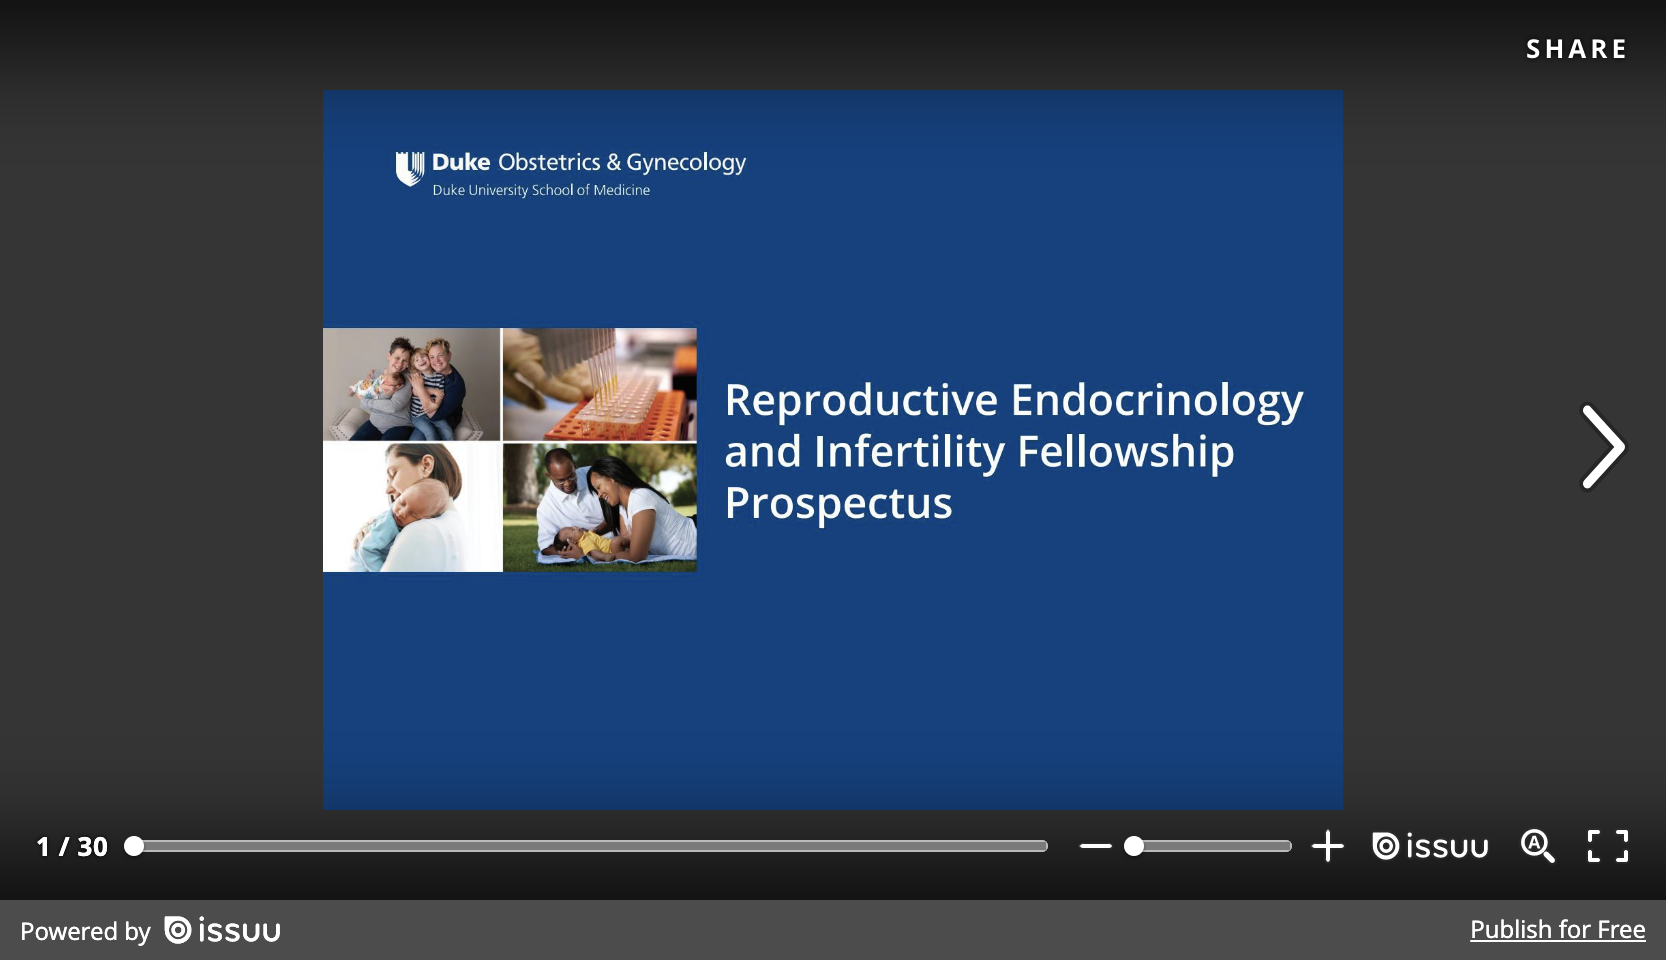 Reproductive Endocrinology and Infertility Fellowship Prospectus